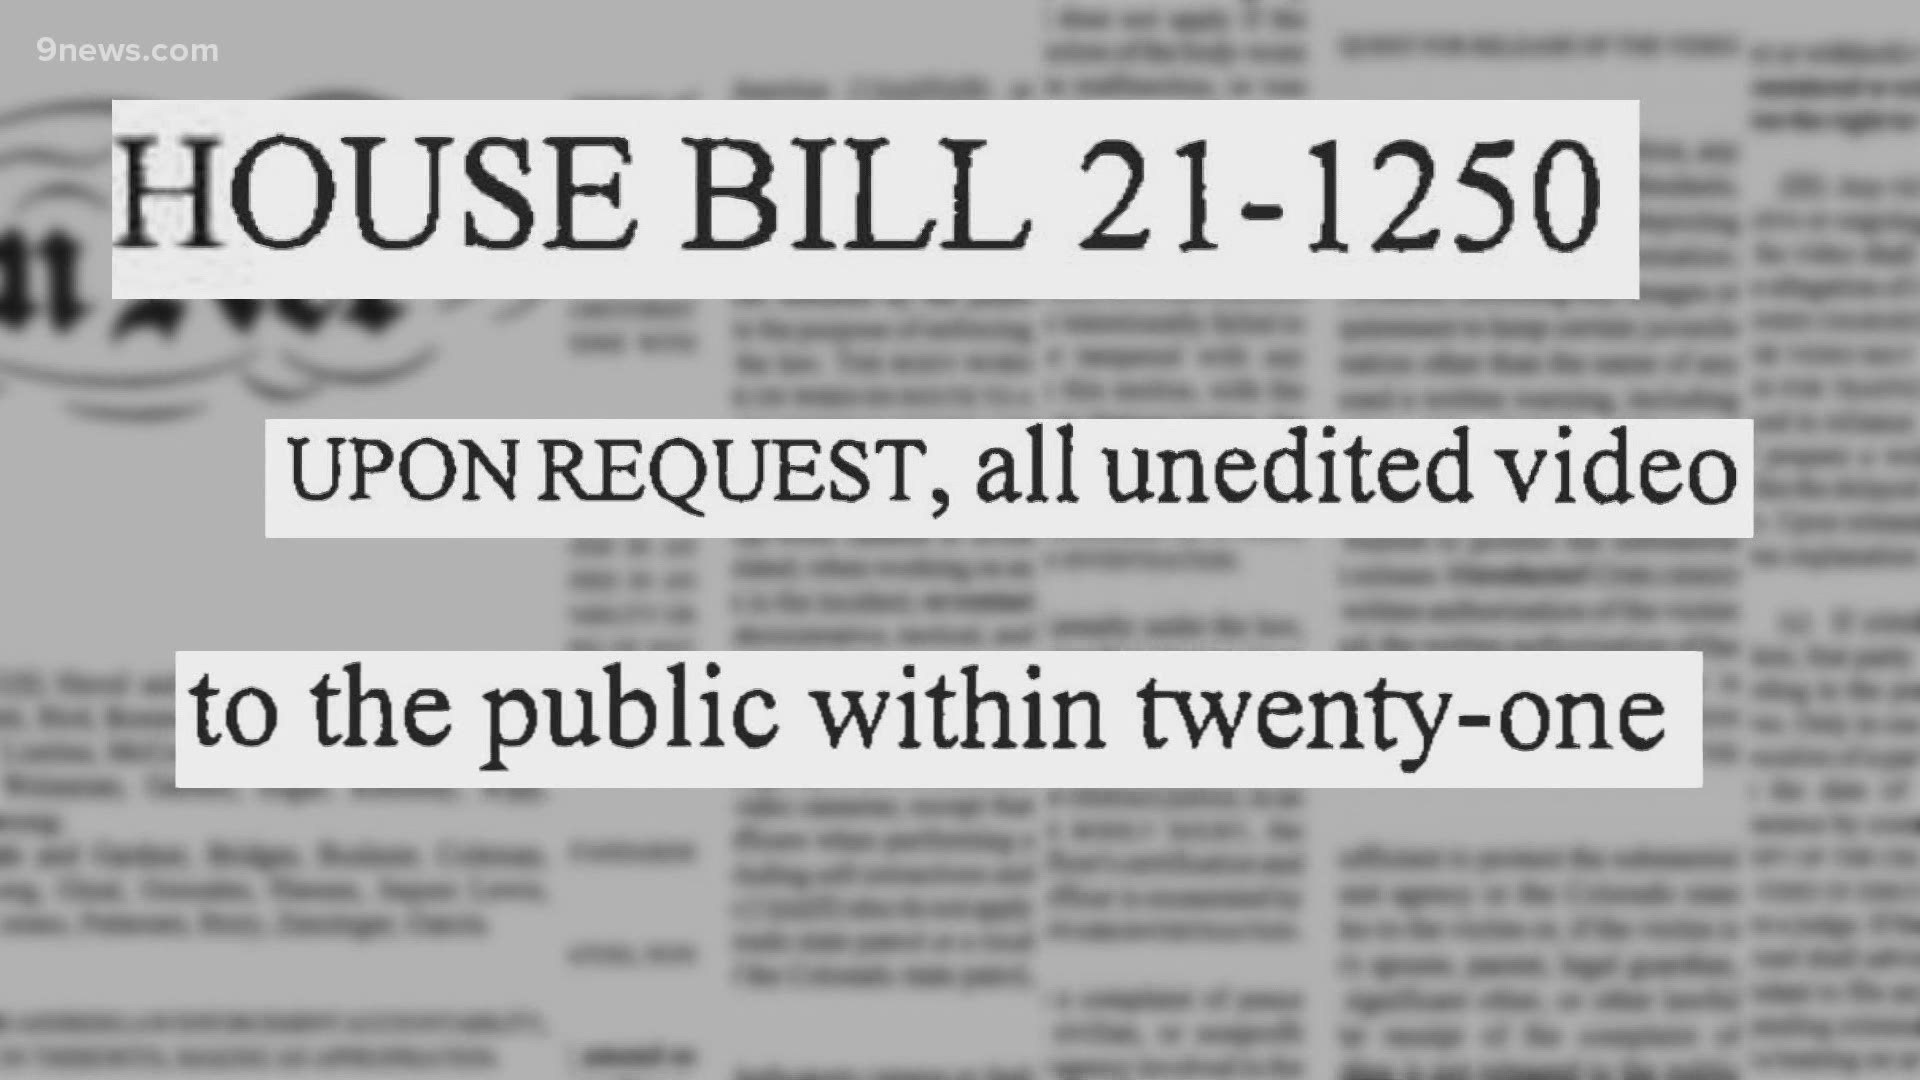 HB21-1250 requires video to be released within 21 days of a request, with some exceptions.